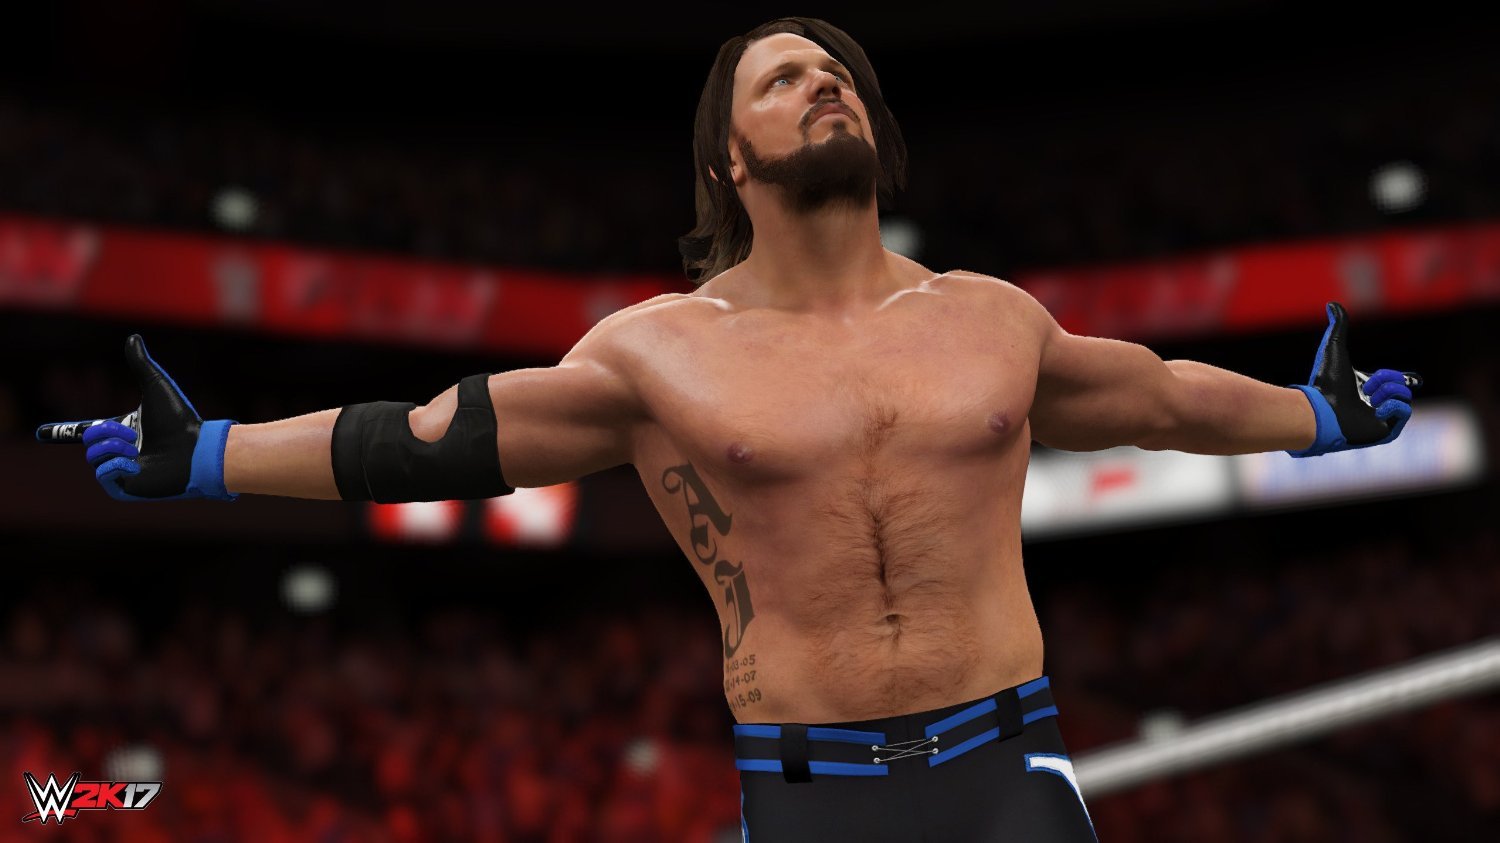 Wwe 2K17 (Ps4) Review 4